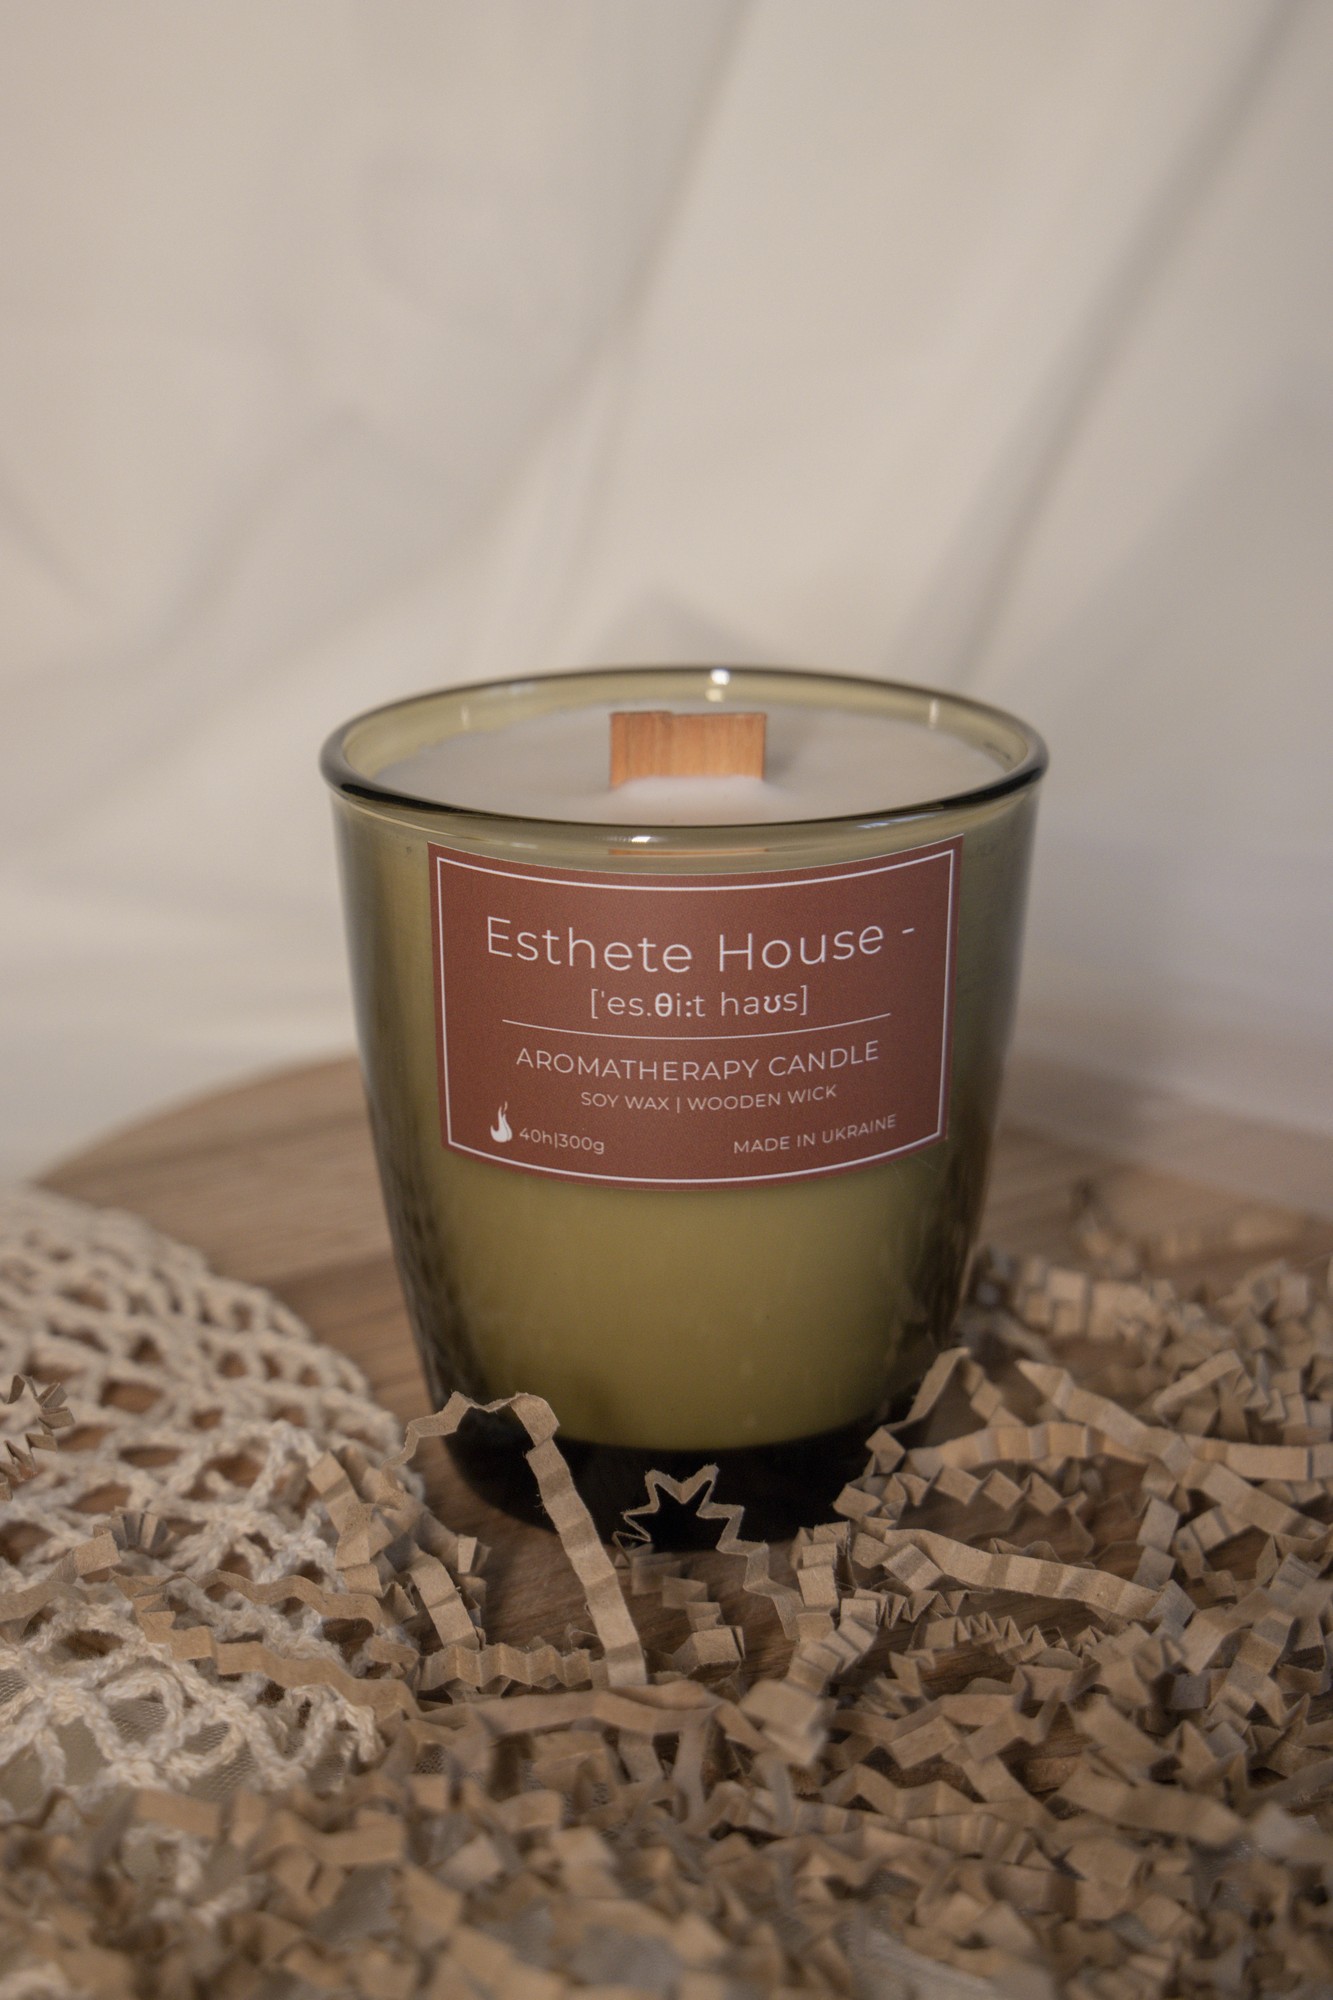 The Esthete House candle - 100 % soy wax